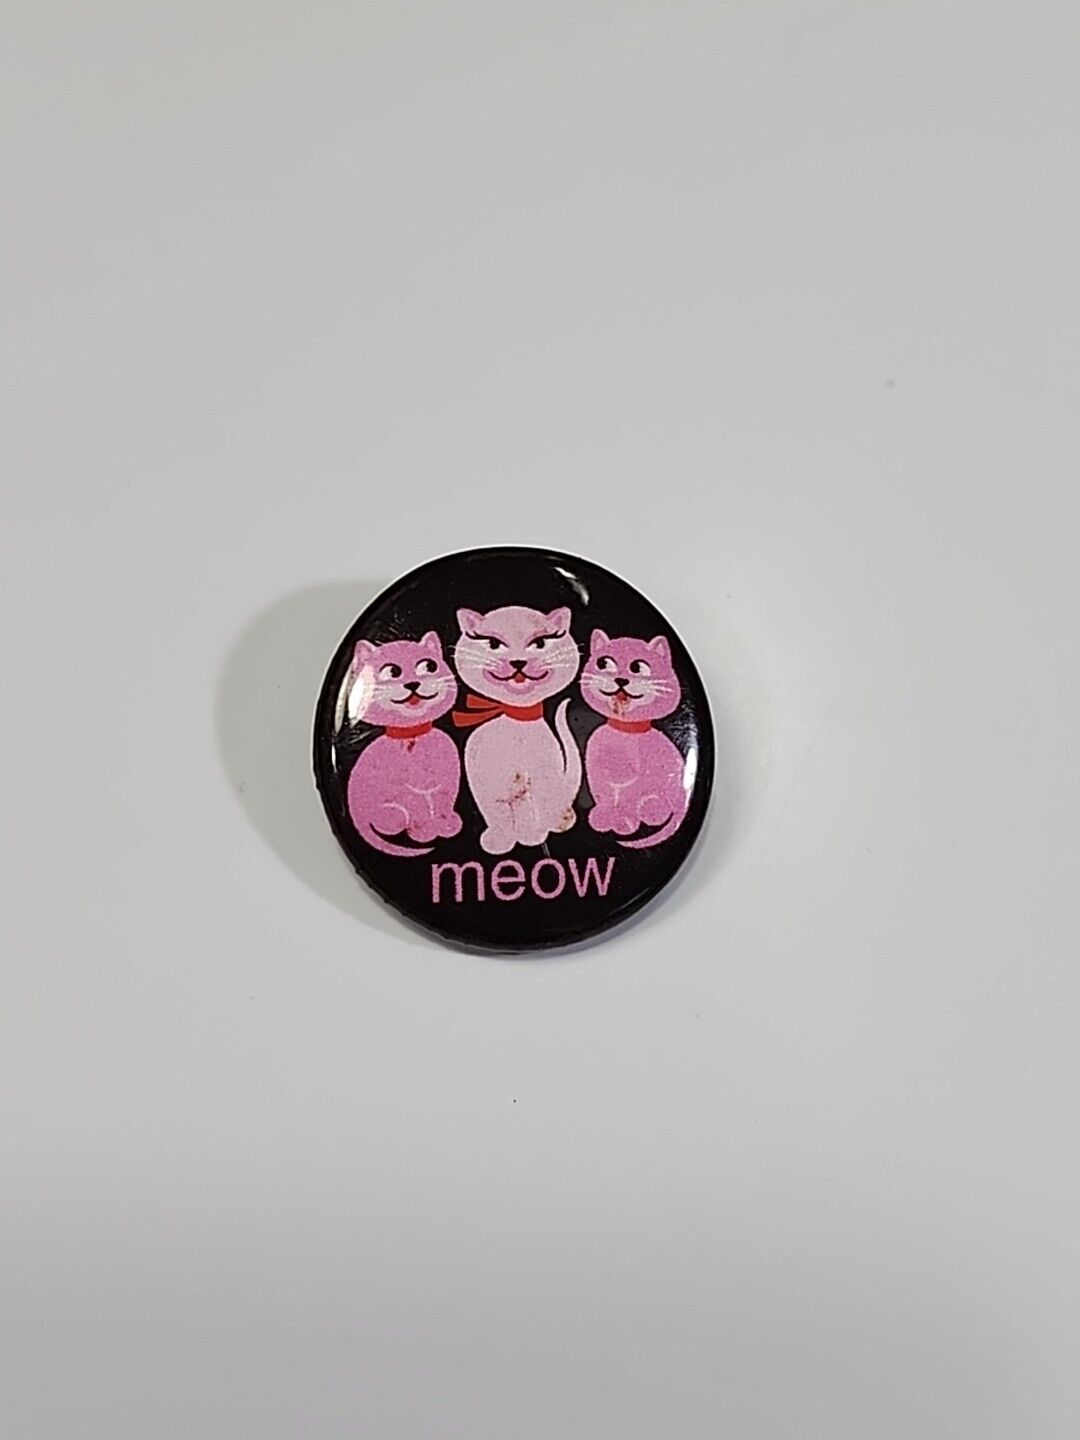 MEOW 3 Pink Cats Button Pin 1\